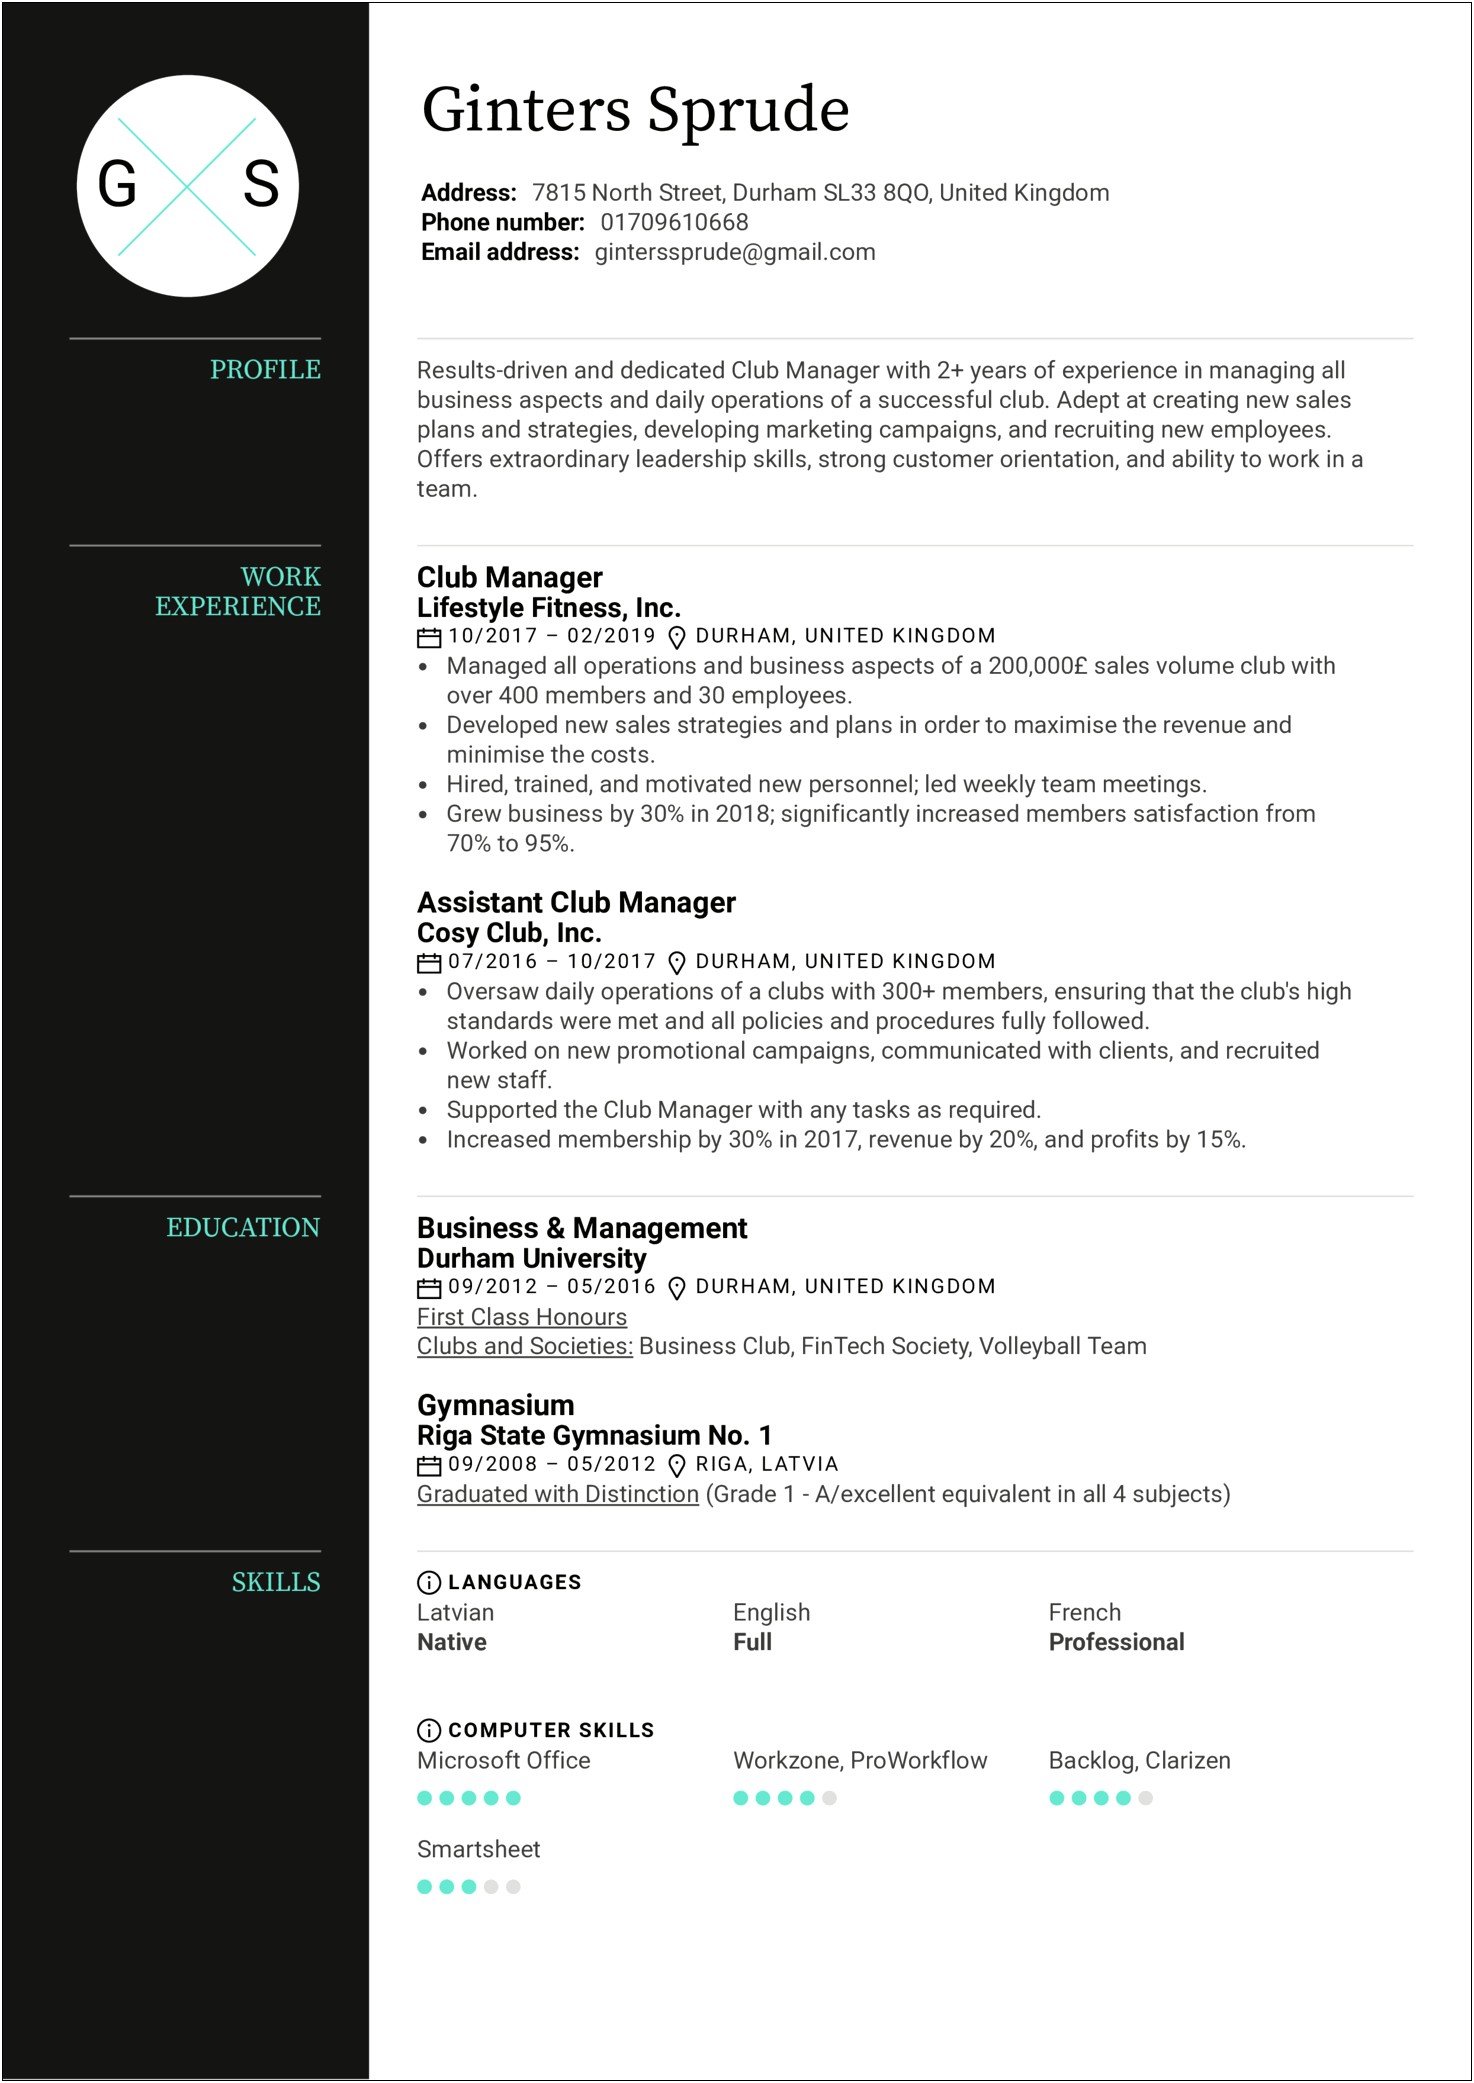 Dance Club General Manager Resume Examples